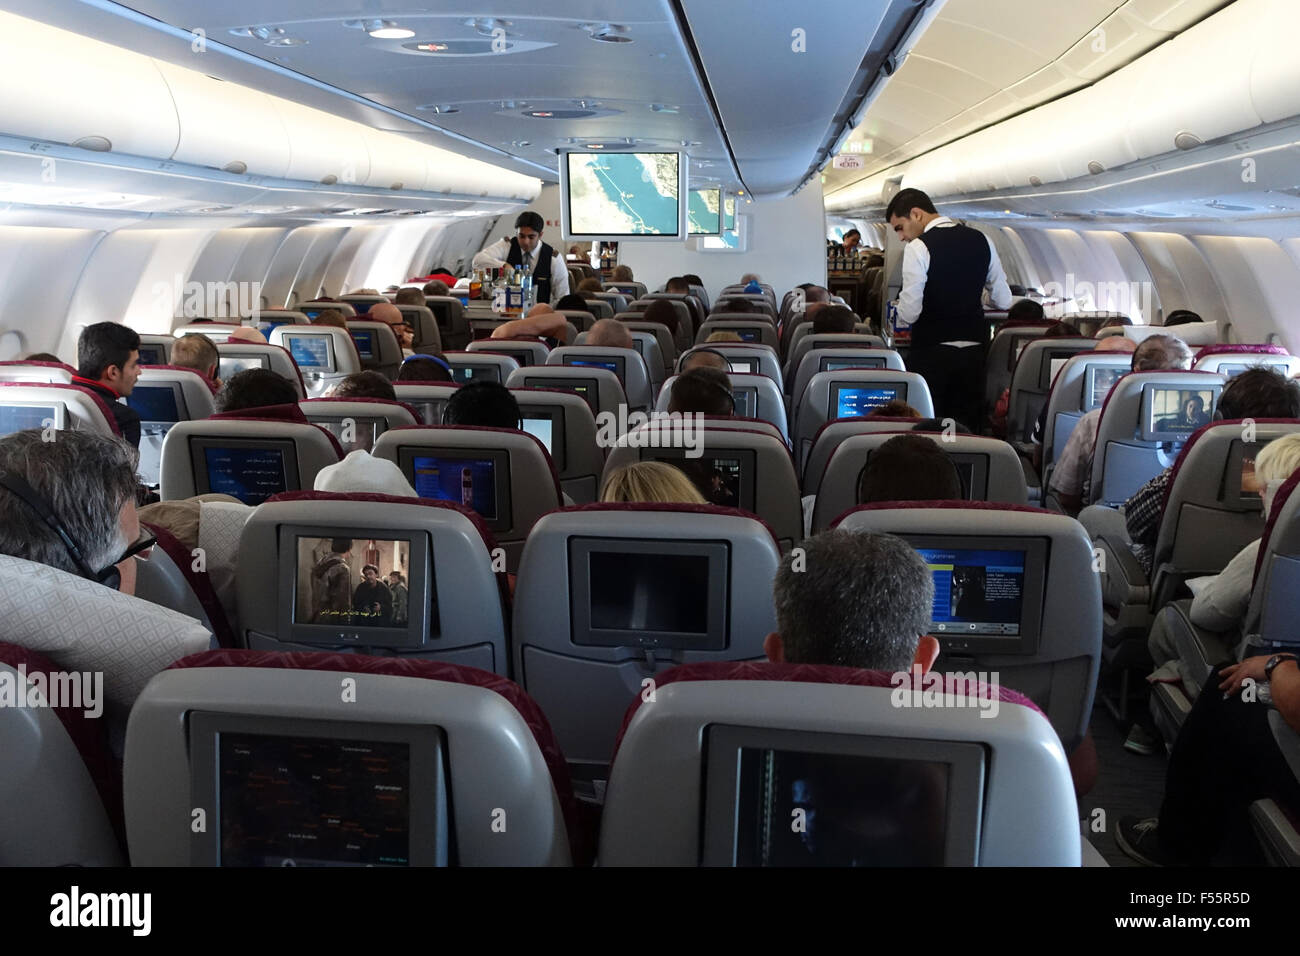 07.03.2015, Doha, Qatar, Qatar - Passengers and flight attendants in an aircraft cabin. 00S150307D627CAROEX.JPG - NOT for SALE in G E R M A N Y, A U S T R I A, S W I T Z E R L A N D [MODEL RELEASE: NO,, PROPERTY RELEASE: NO (c) caro photo agency / Sorge, http://www.caro-images.pl, info@carofoto.pl - In case of using the picture for non-journalistic purposes, please contact the agency - the picture is subject to royalty!] Stock Photo